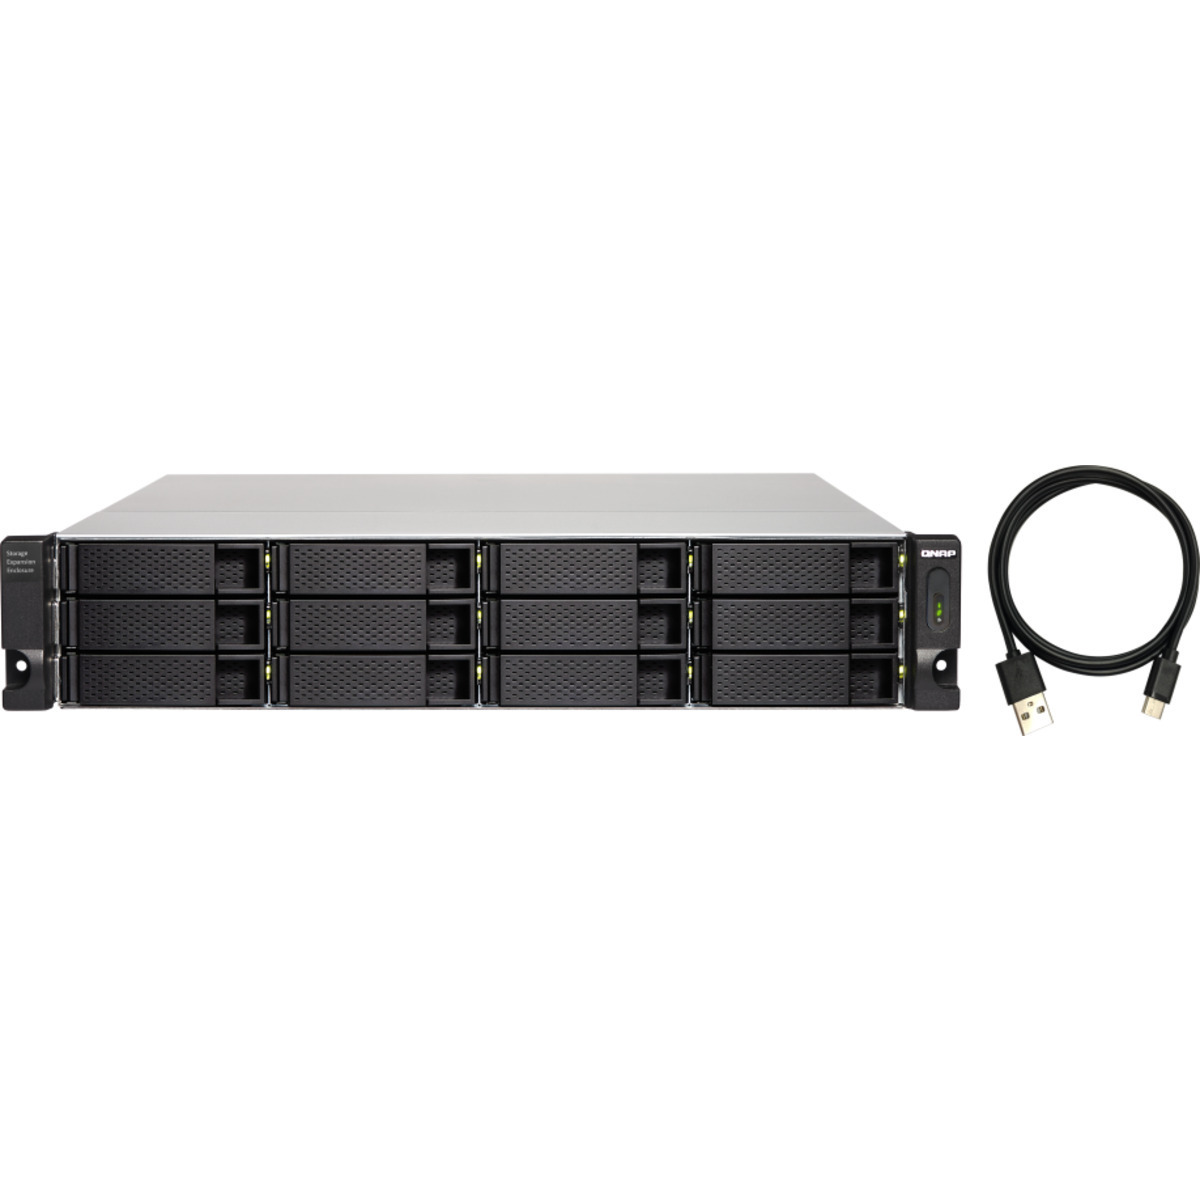 QNAP TL-R1200C-RP External Expansion Drive 242tb 12-Bay RackMount Multimedia / Power User / Business Expansion Enclosure 11x22tb Seagate IronWolf Pro ST22000NT001 3.5 7200rpm SATA 6Gb/s HDD NAS Class Drives Installed - Burn-In Tested TL-R1200C-RP External Expansion Drive